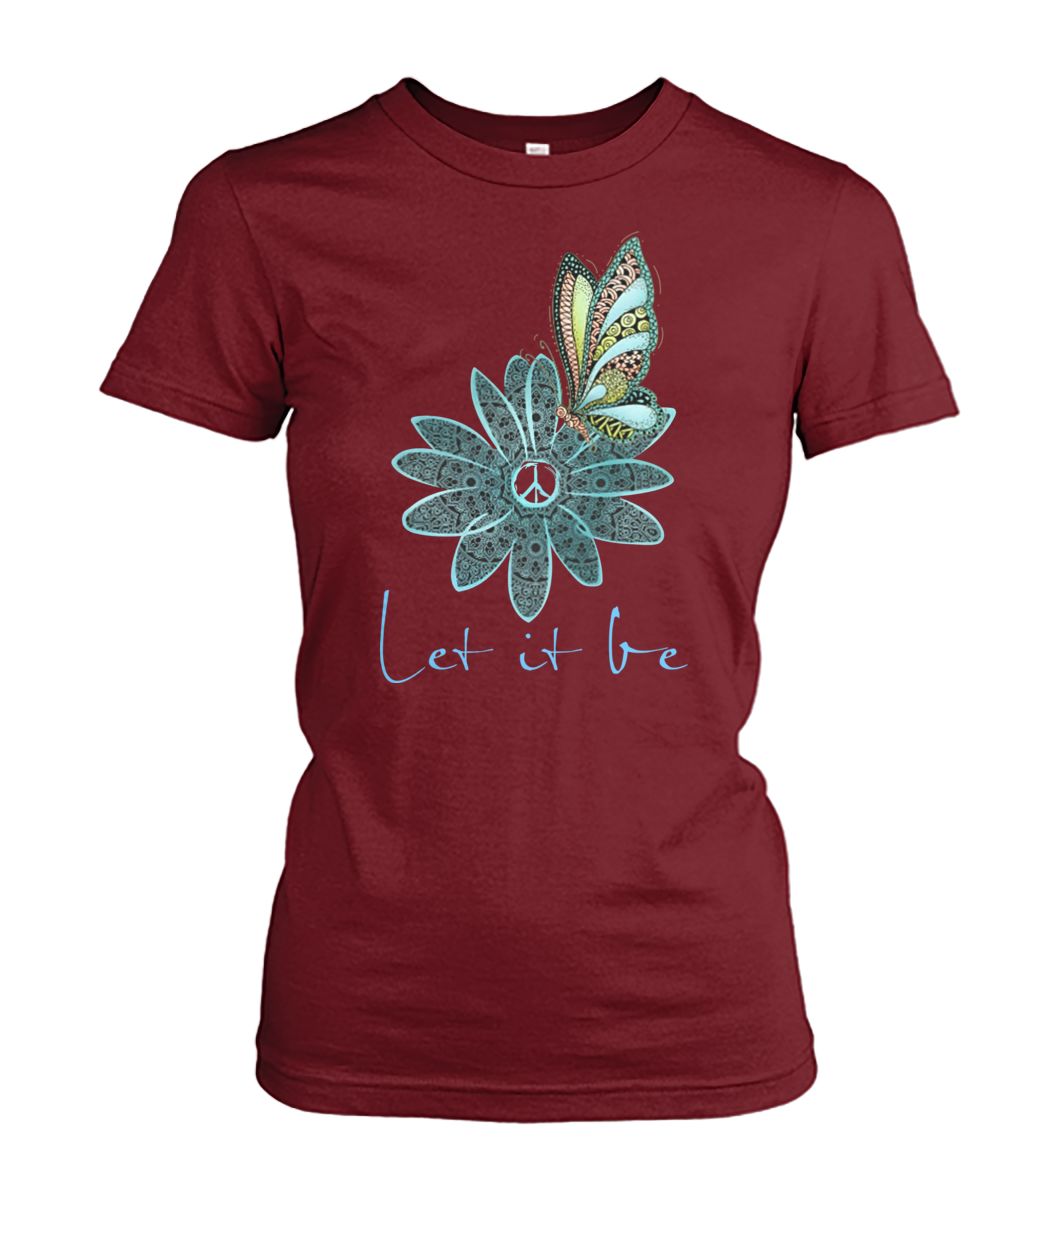 Let it be butterfly and flower women's crew tee